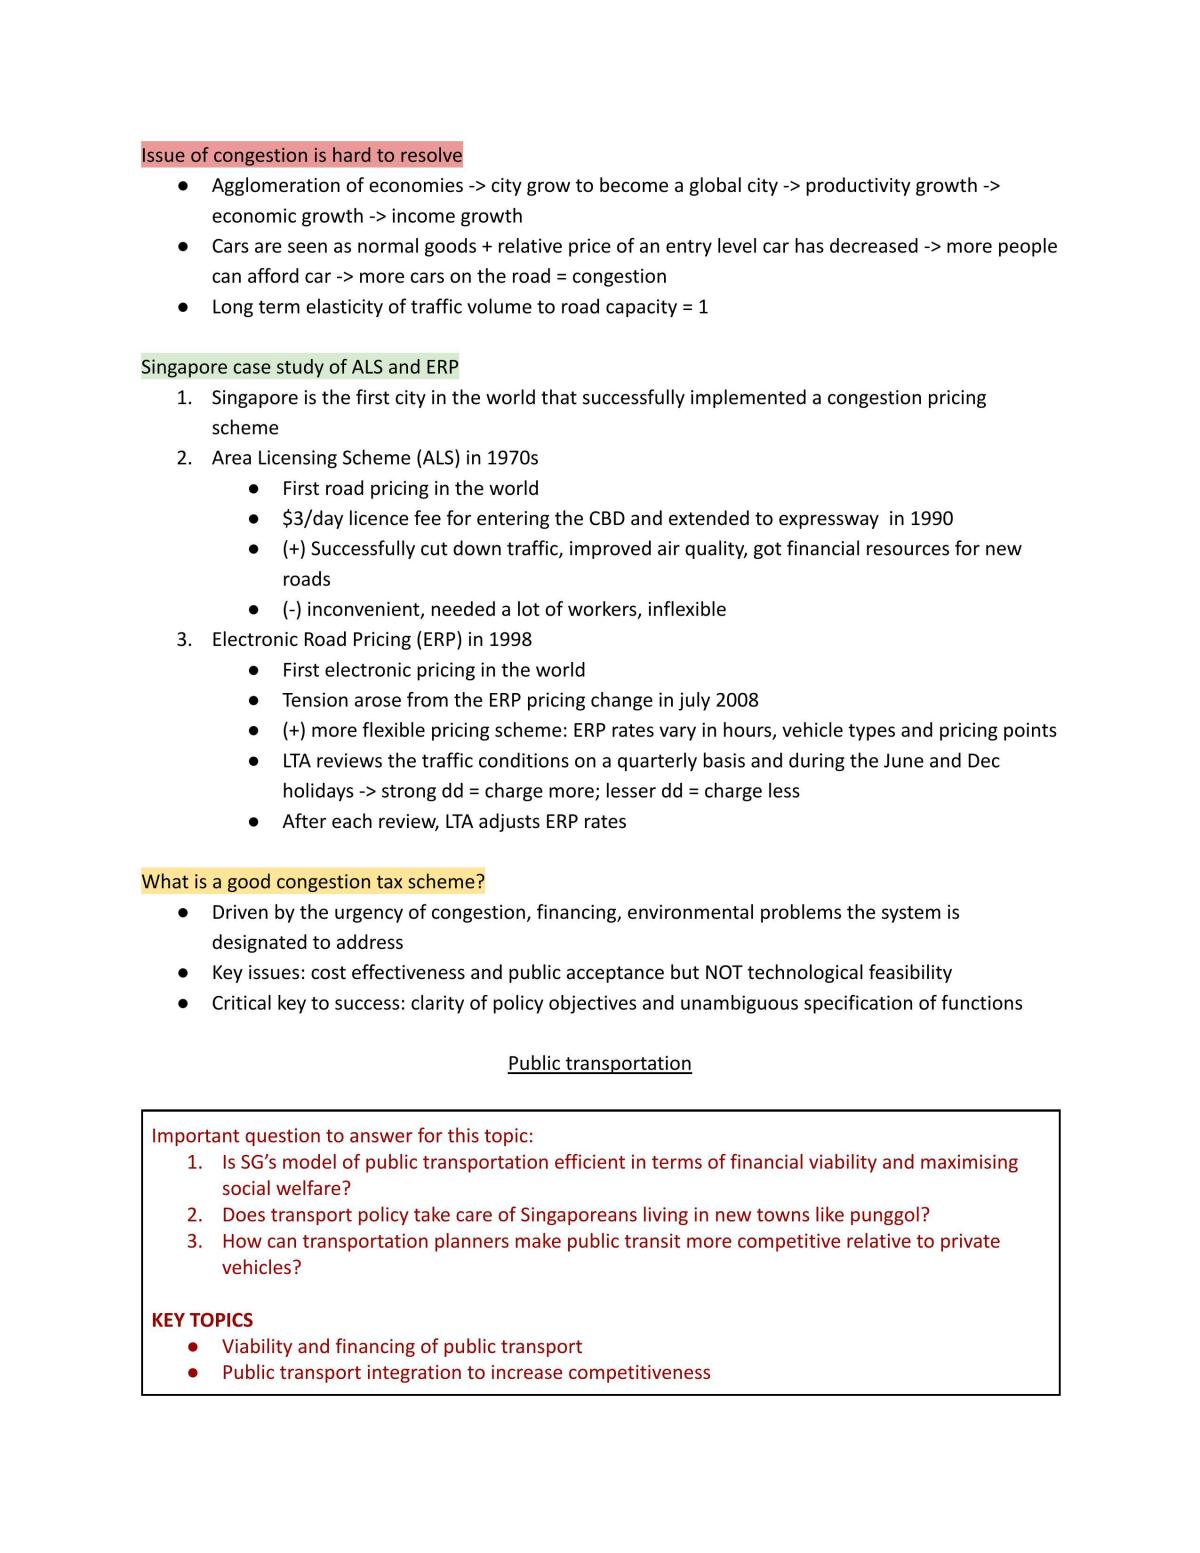 RE2705 Summary Notes - Page 21